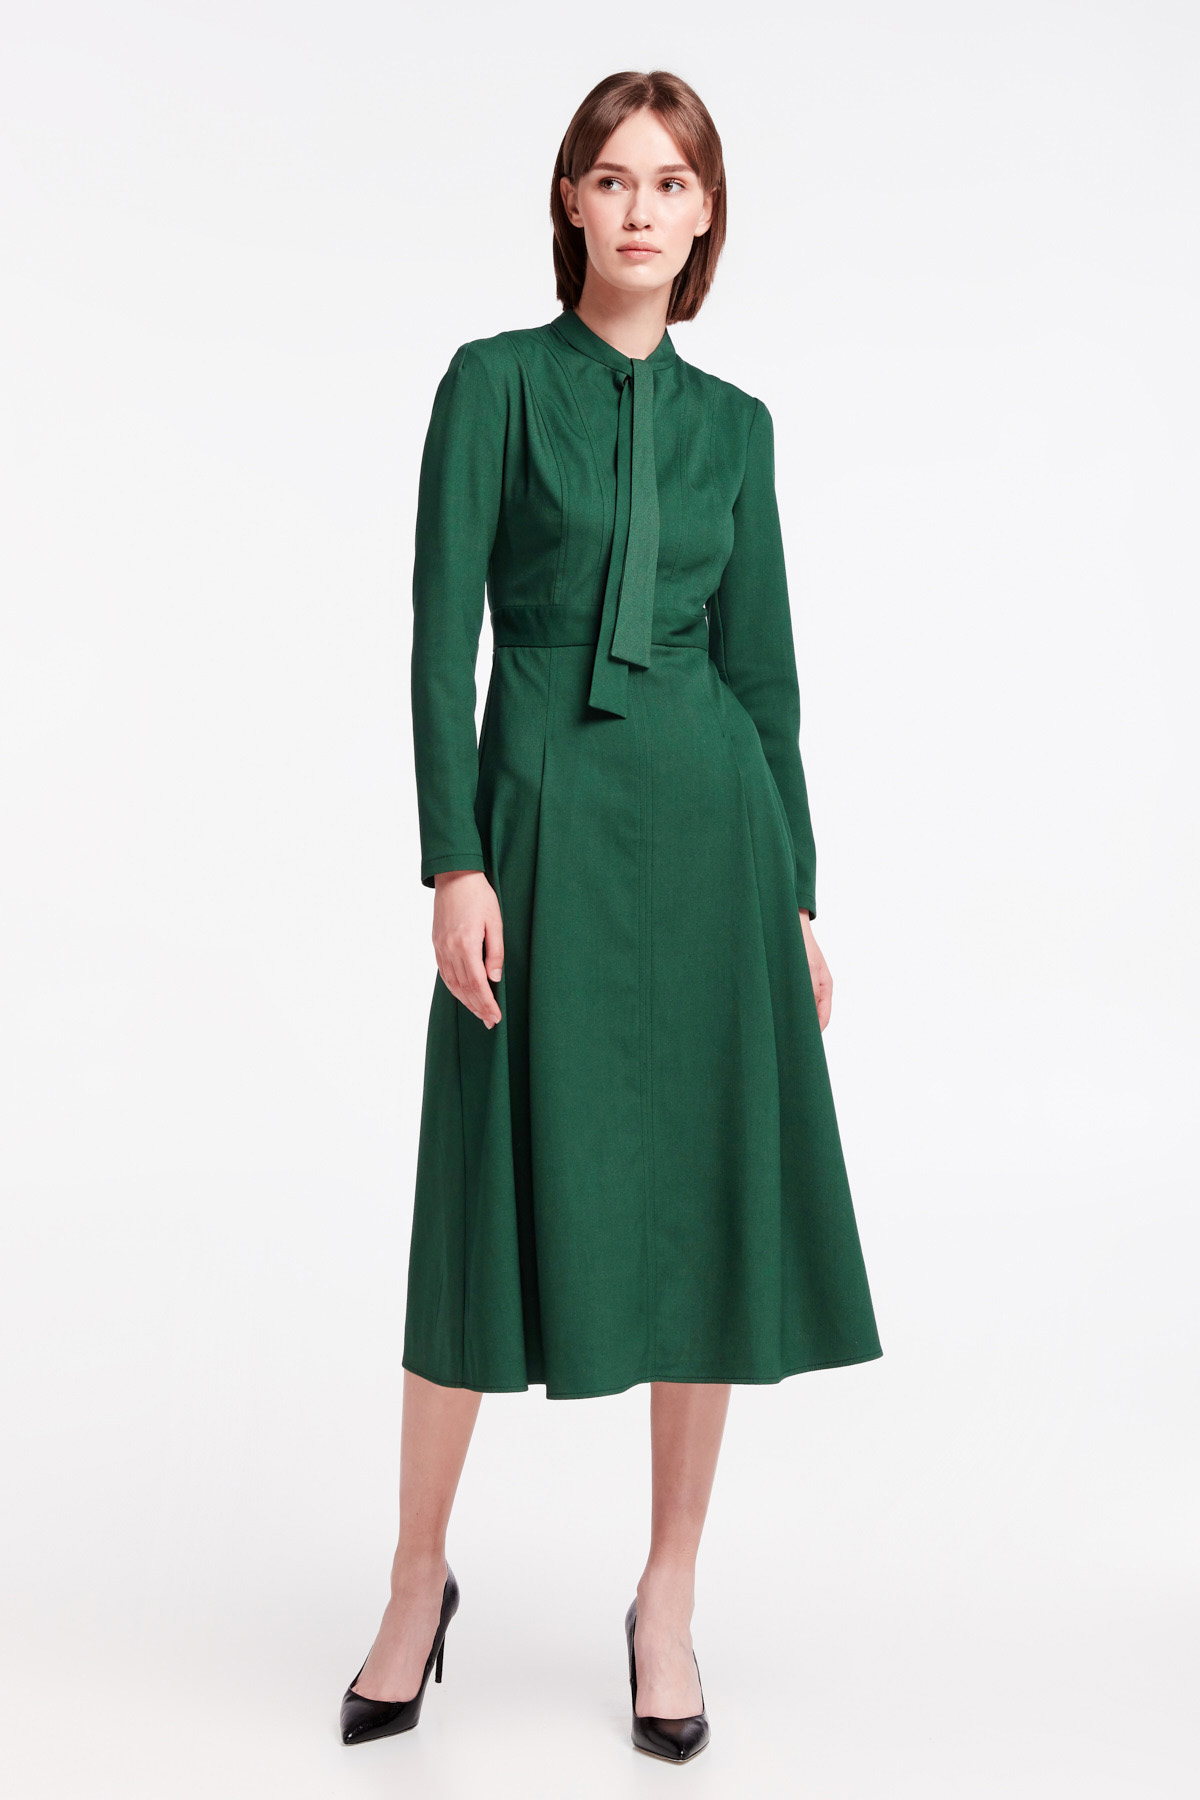 Green dress with a bow, photo 9